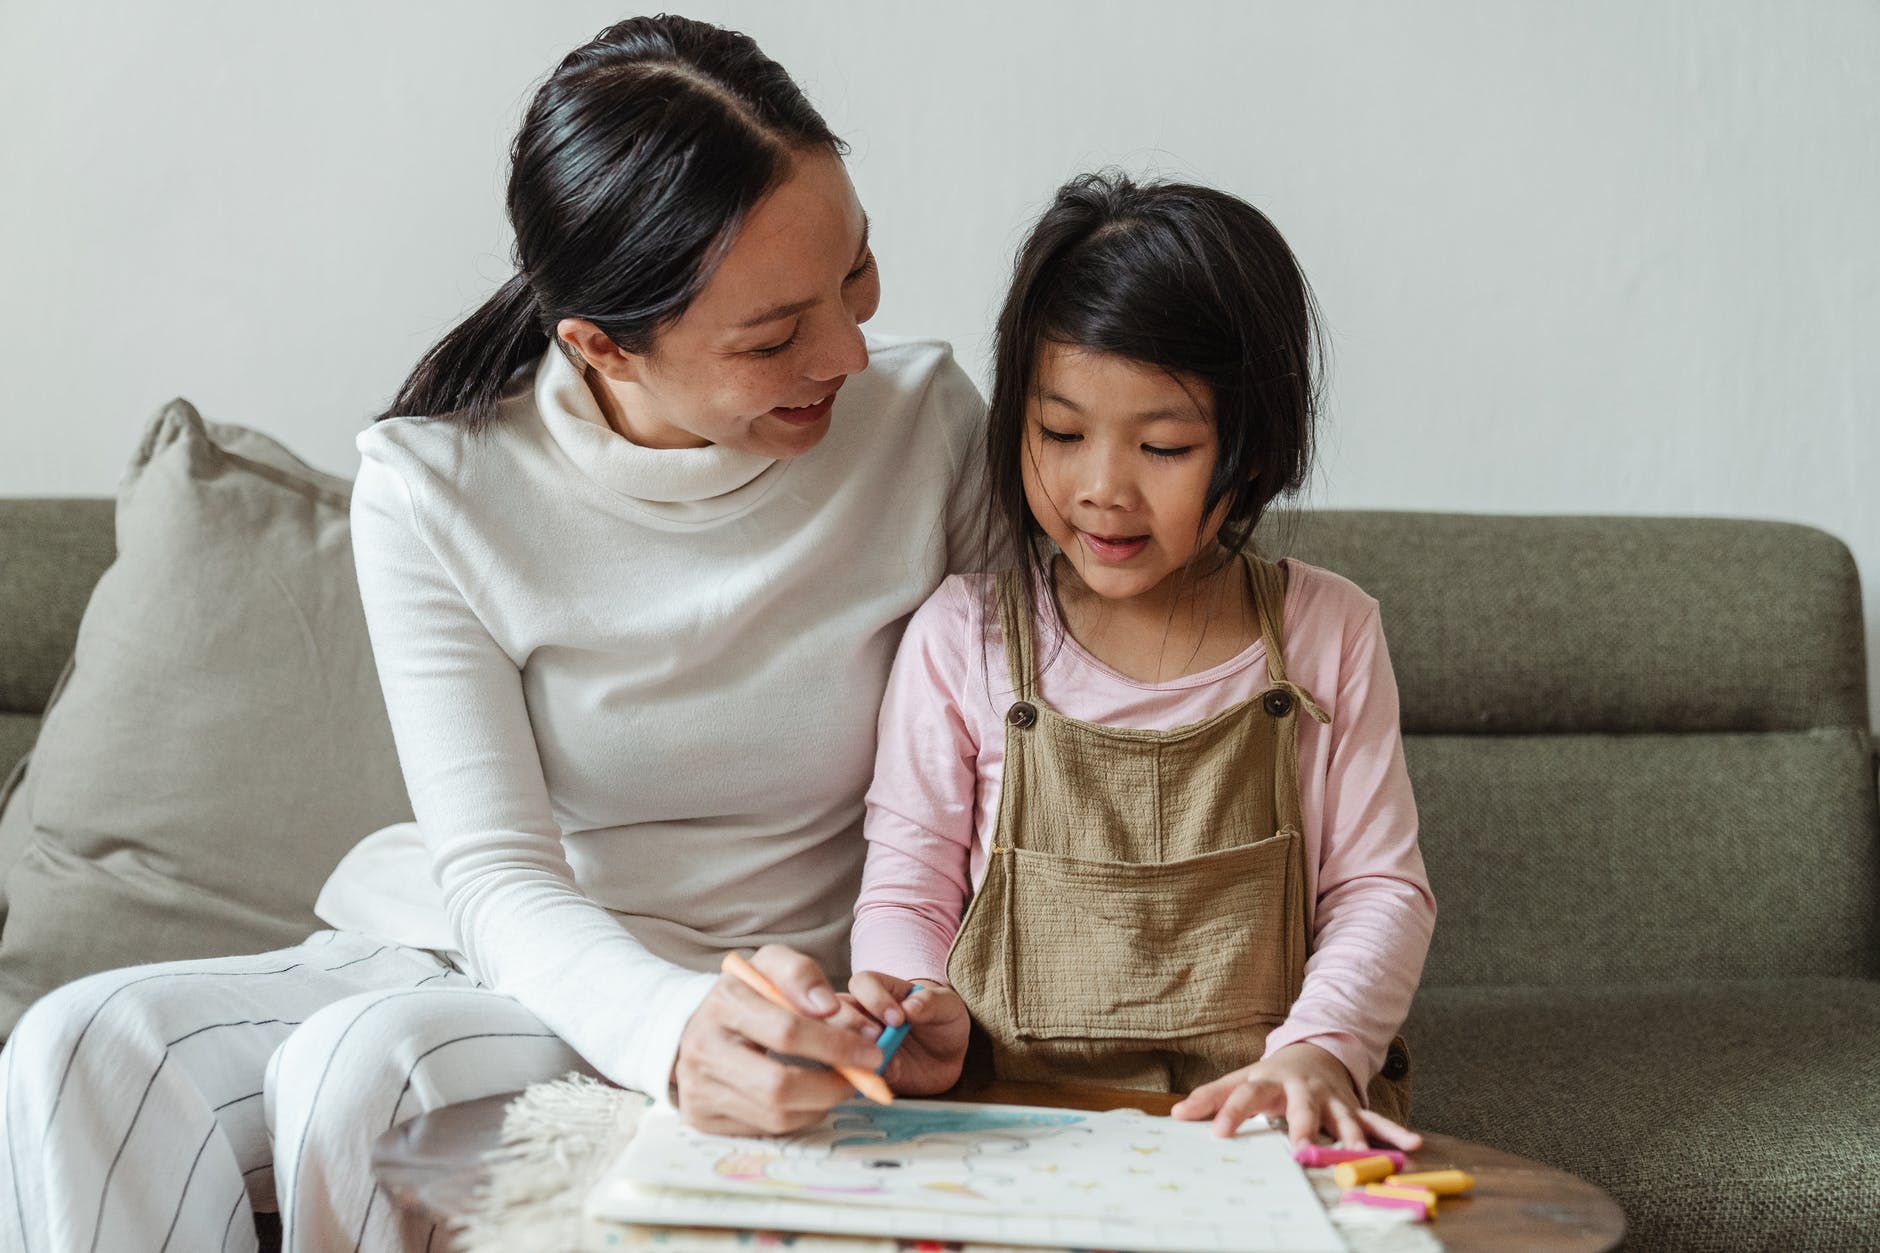 smiling woman tutoring ethnic girl at homeFIVE TOP TIPS FOR HOME LEARNING